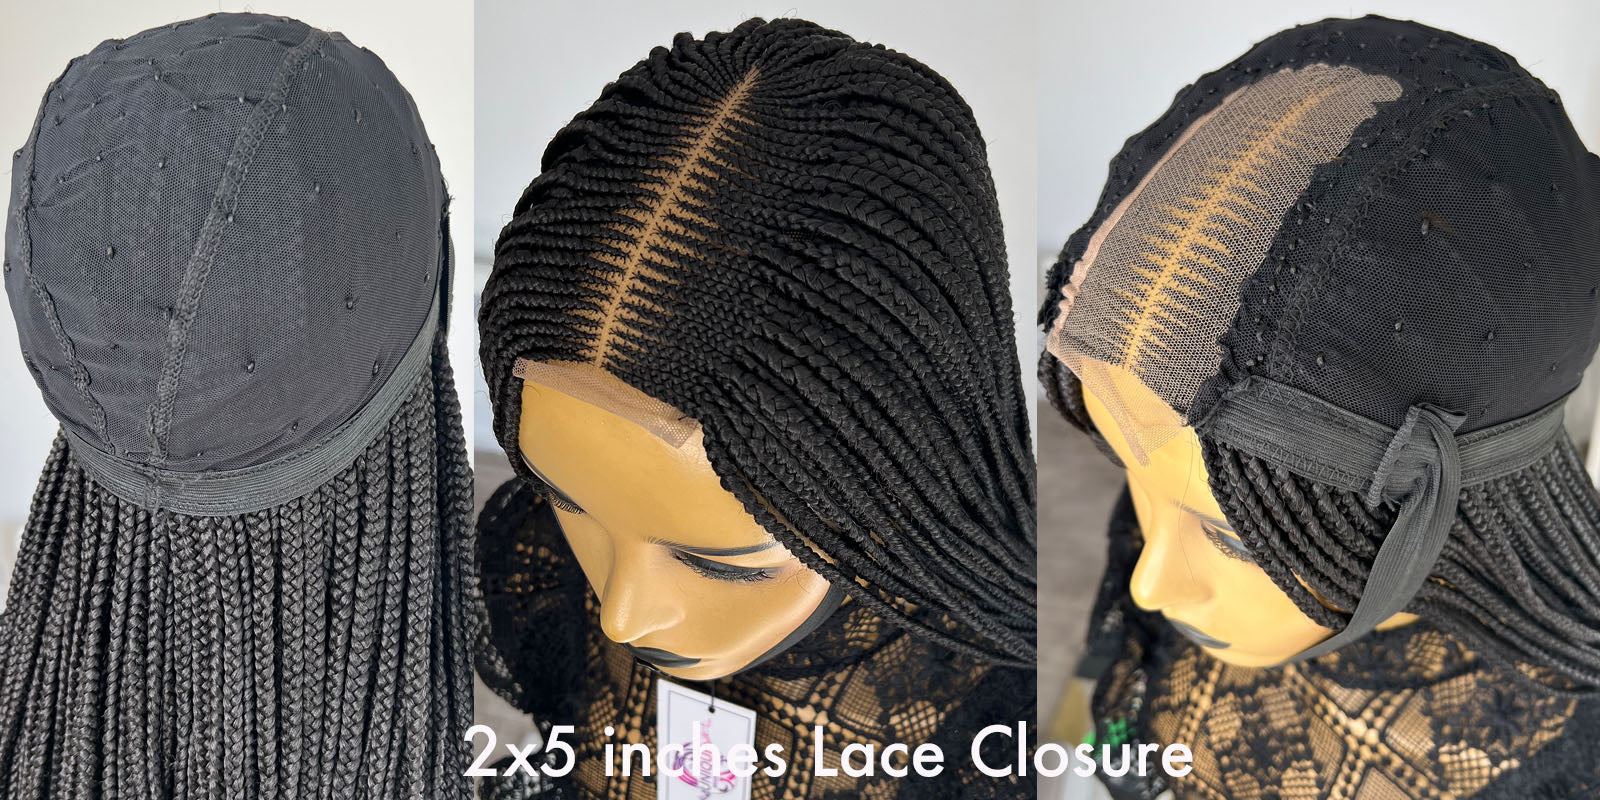 Lace closure braided wigs